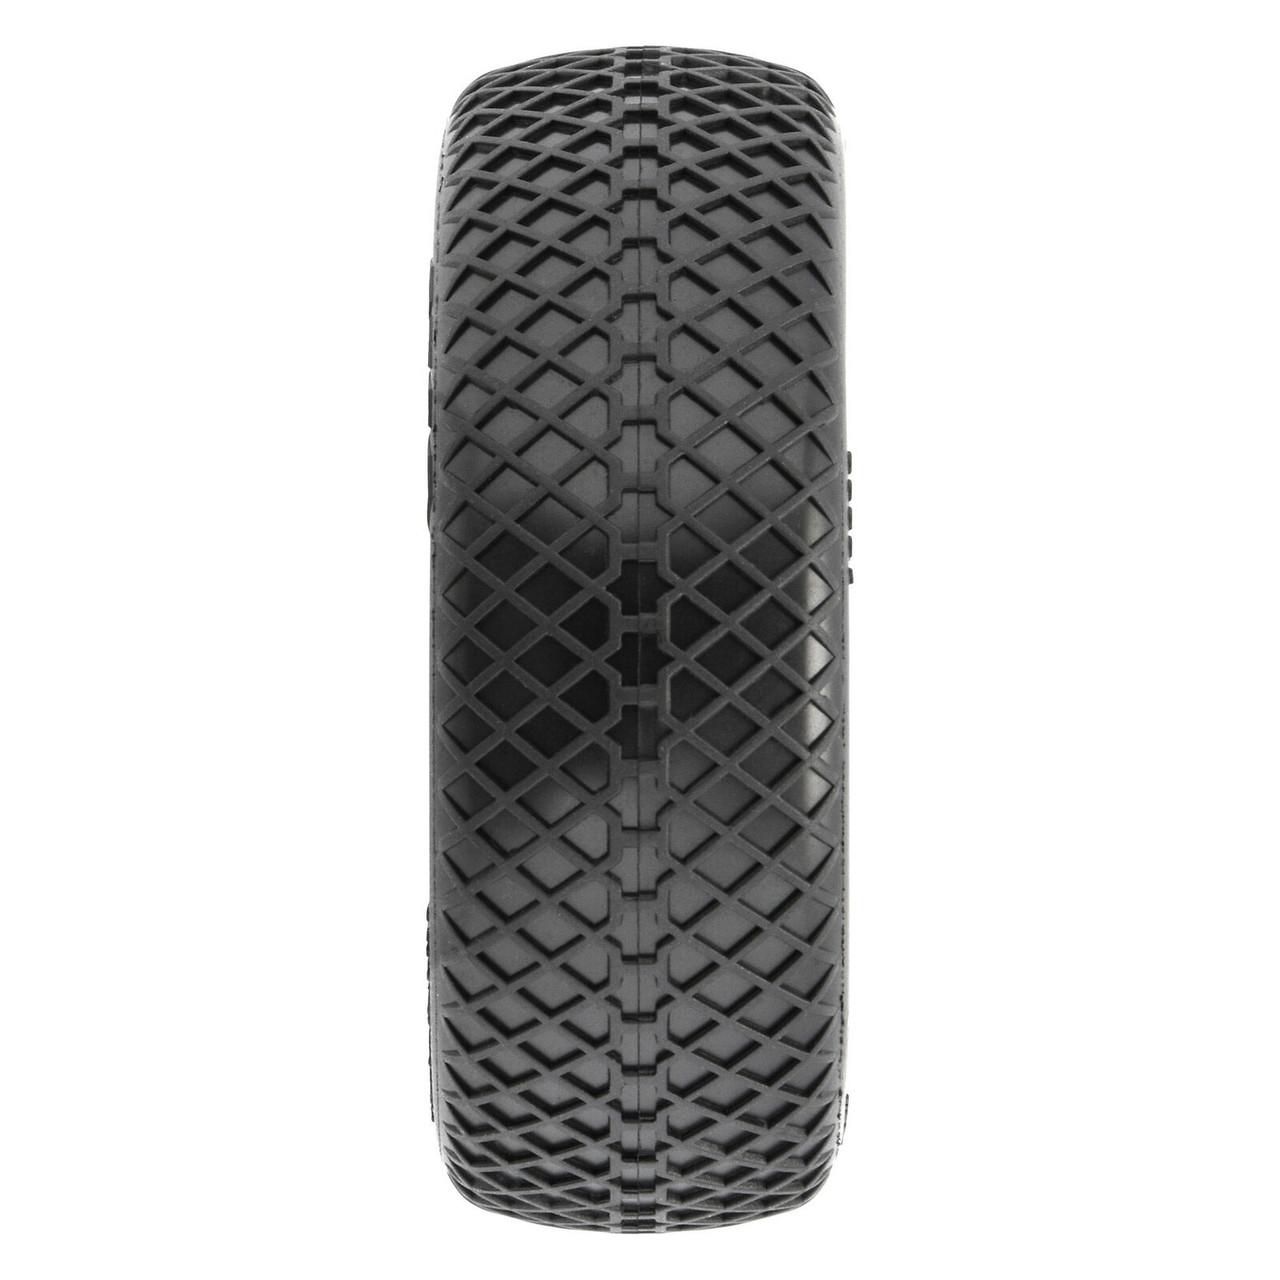 AKA 13232CR 1/10 Viper Clay 2WD Front 2.2" Off-Road Buggy Tires (2)